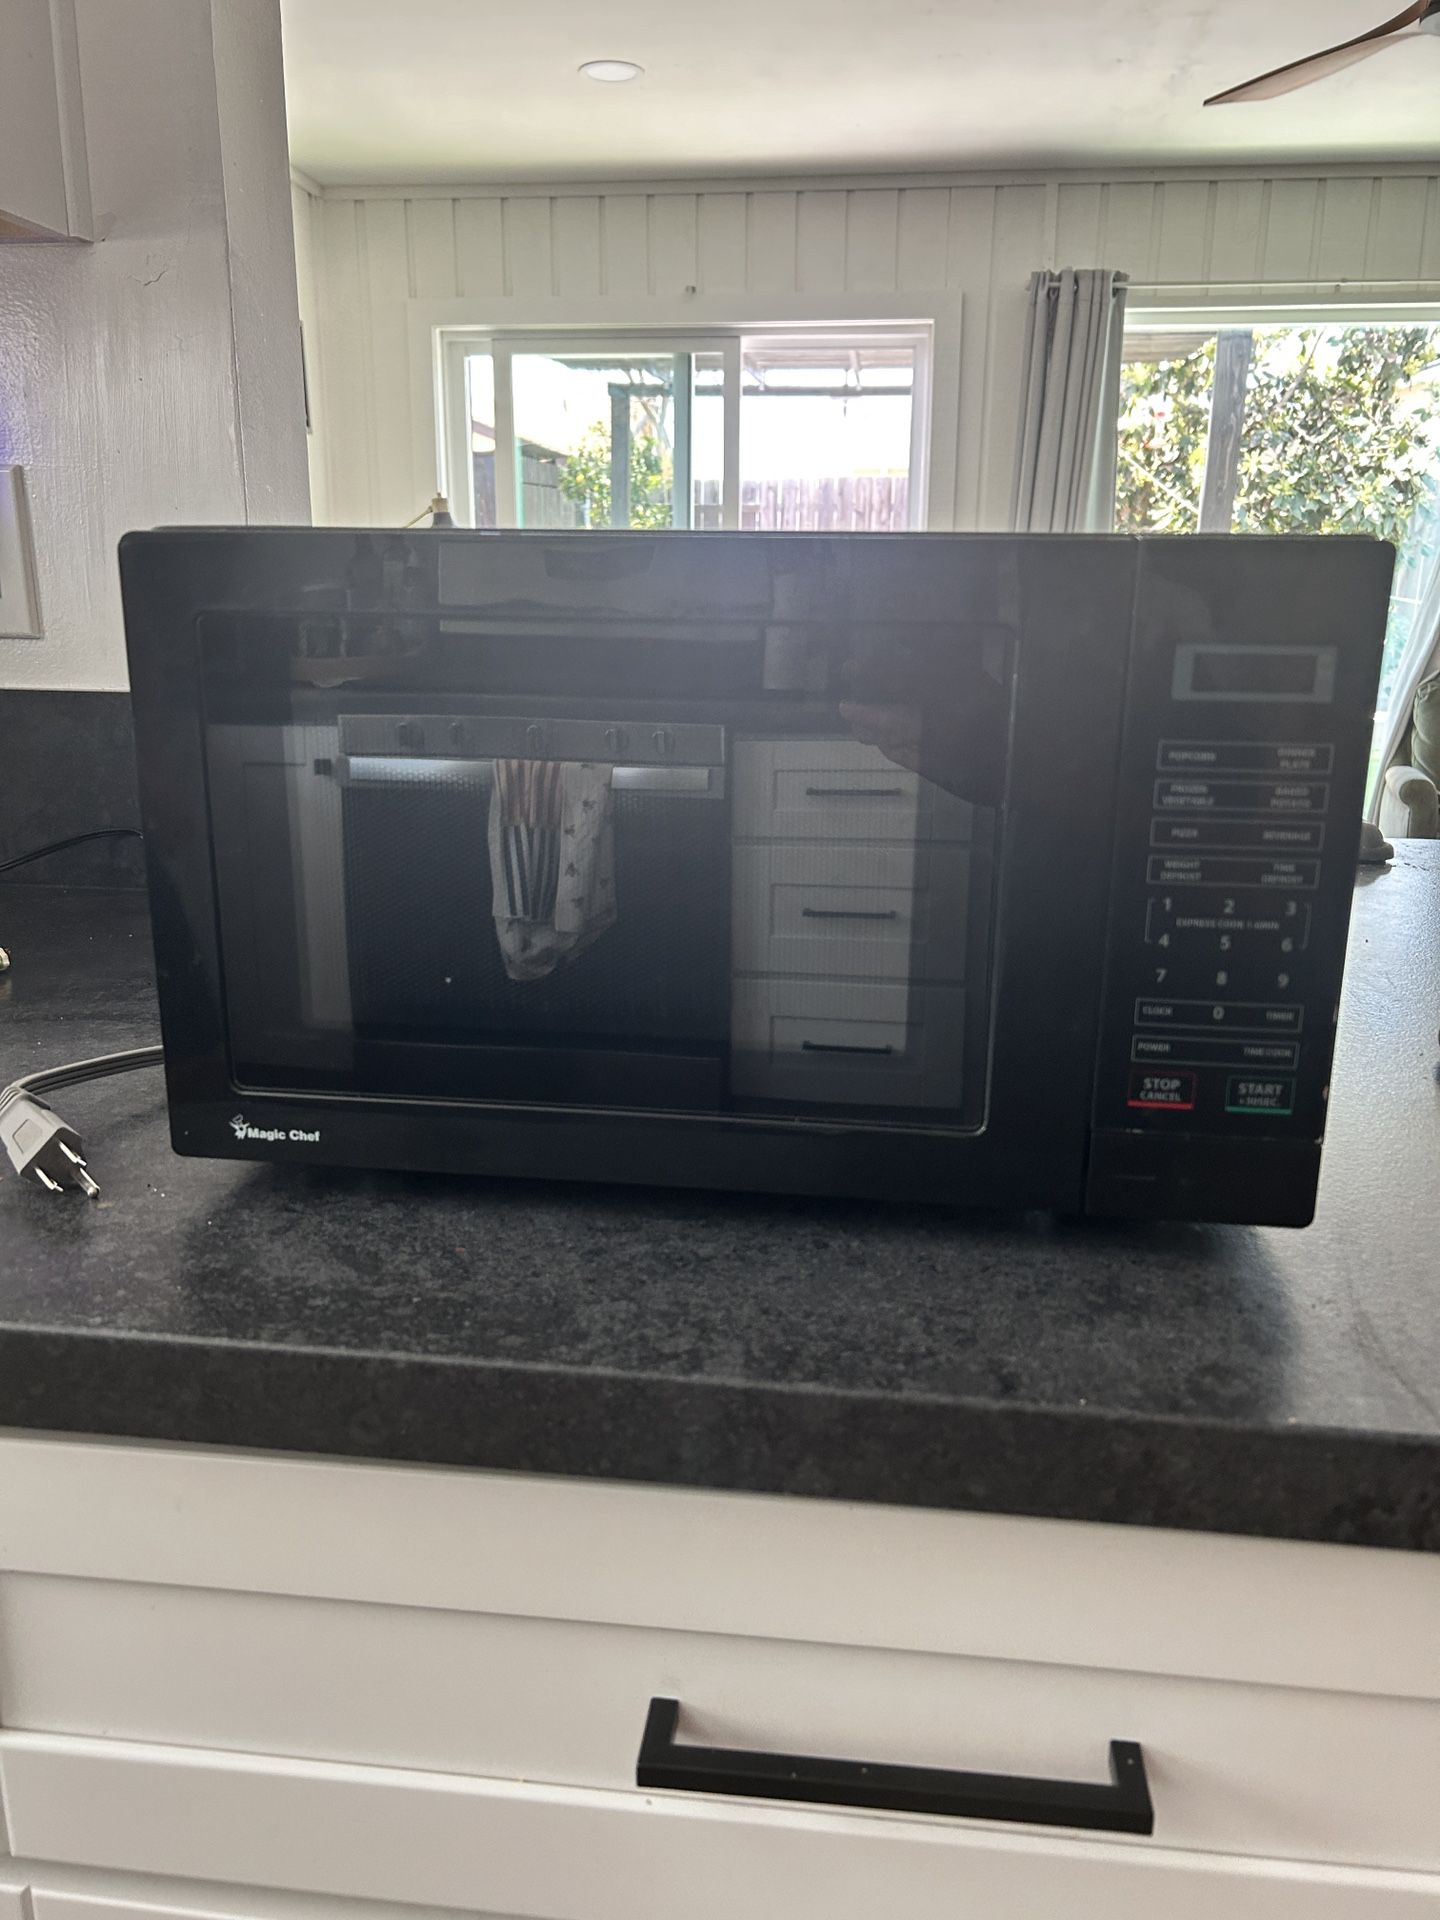 Magic chef MICROWAVE Barely Used 